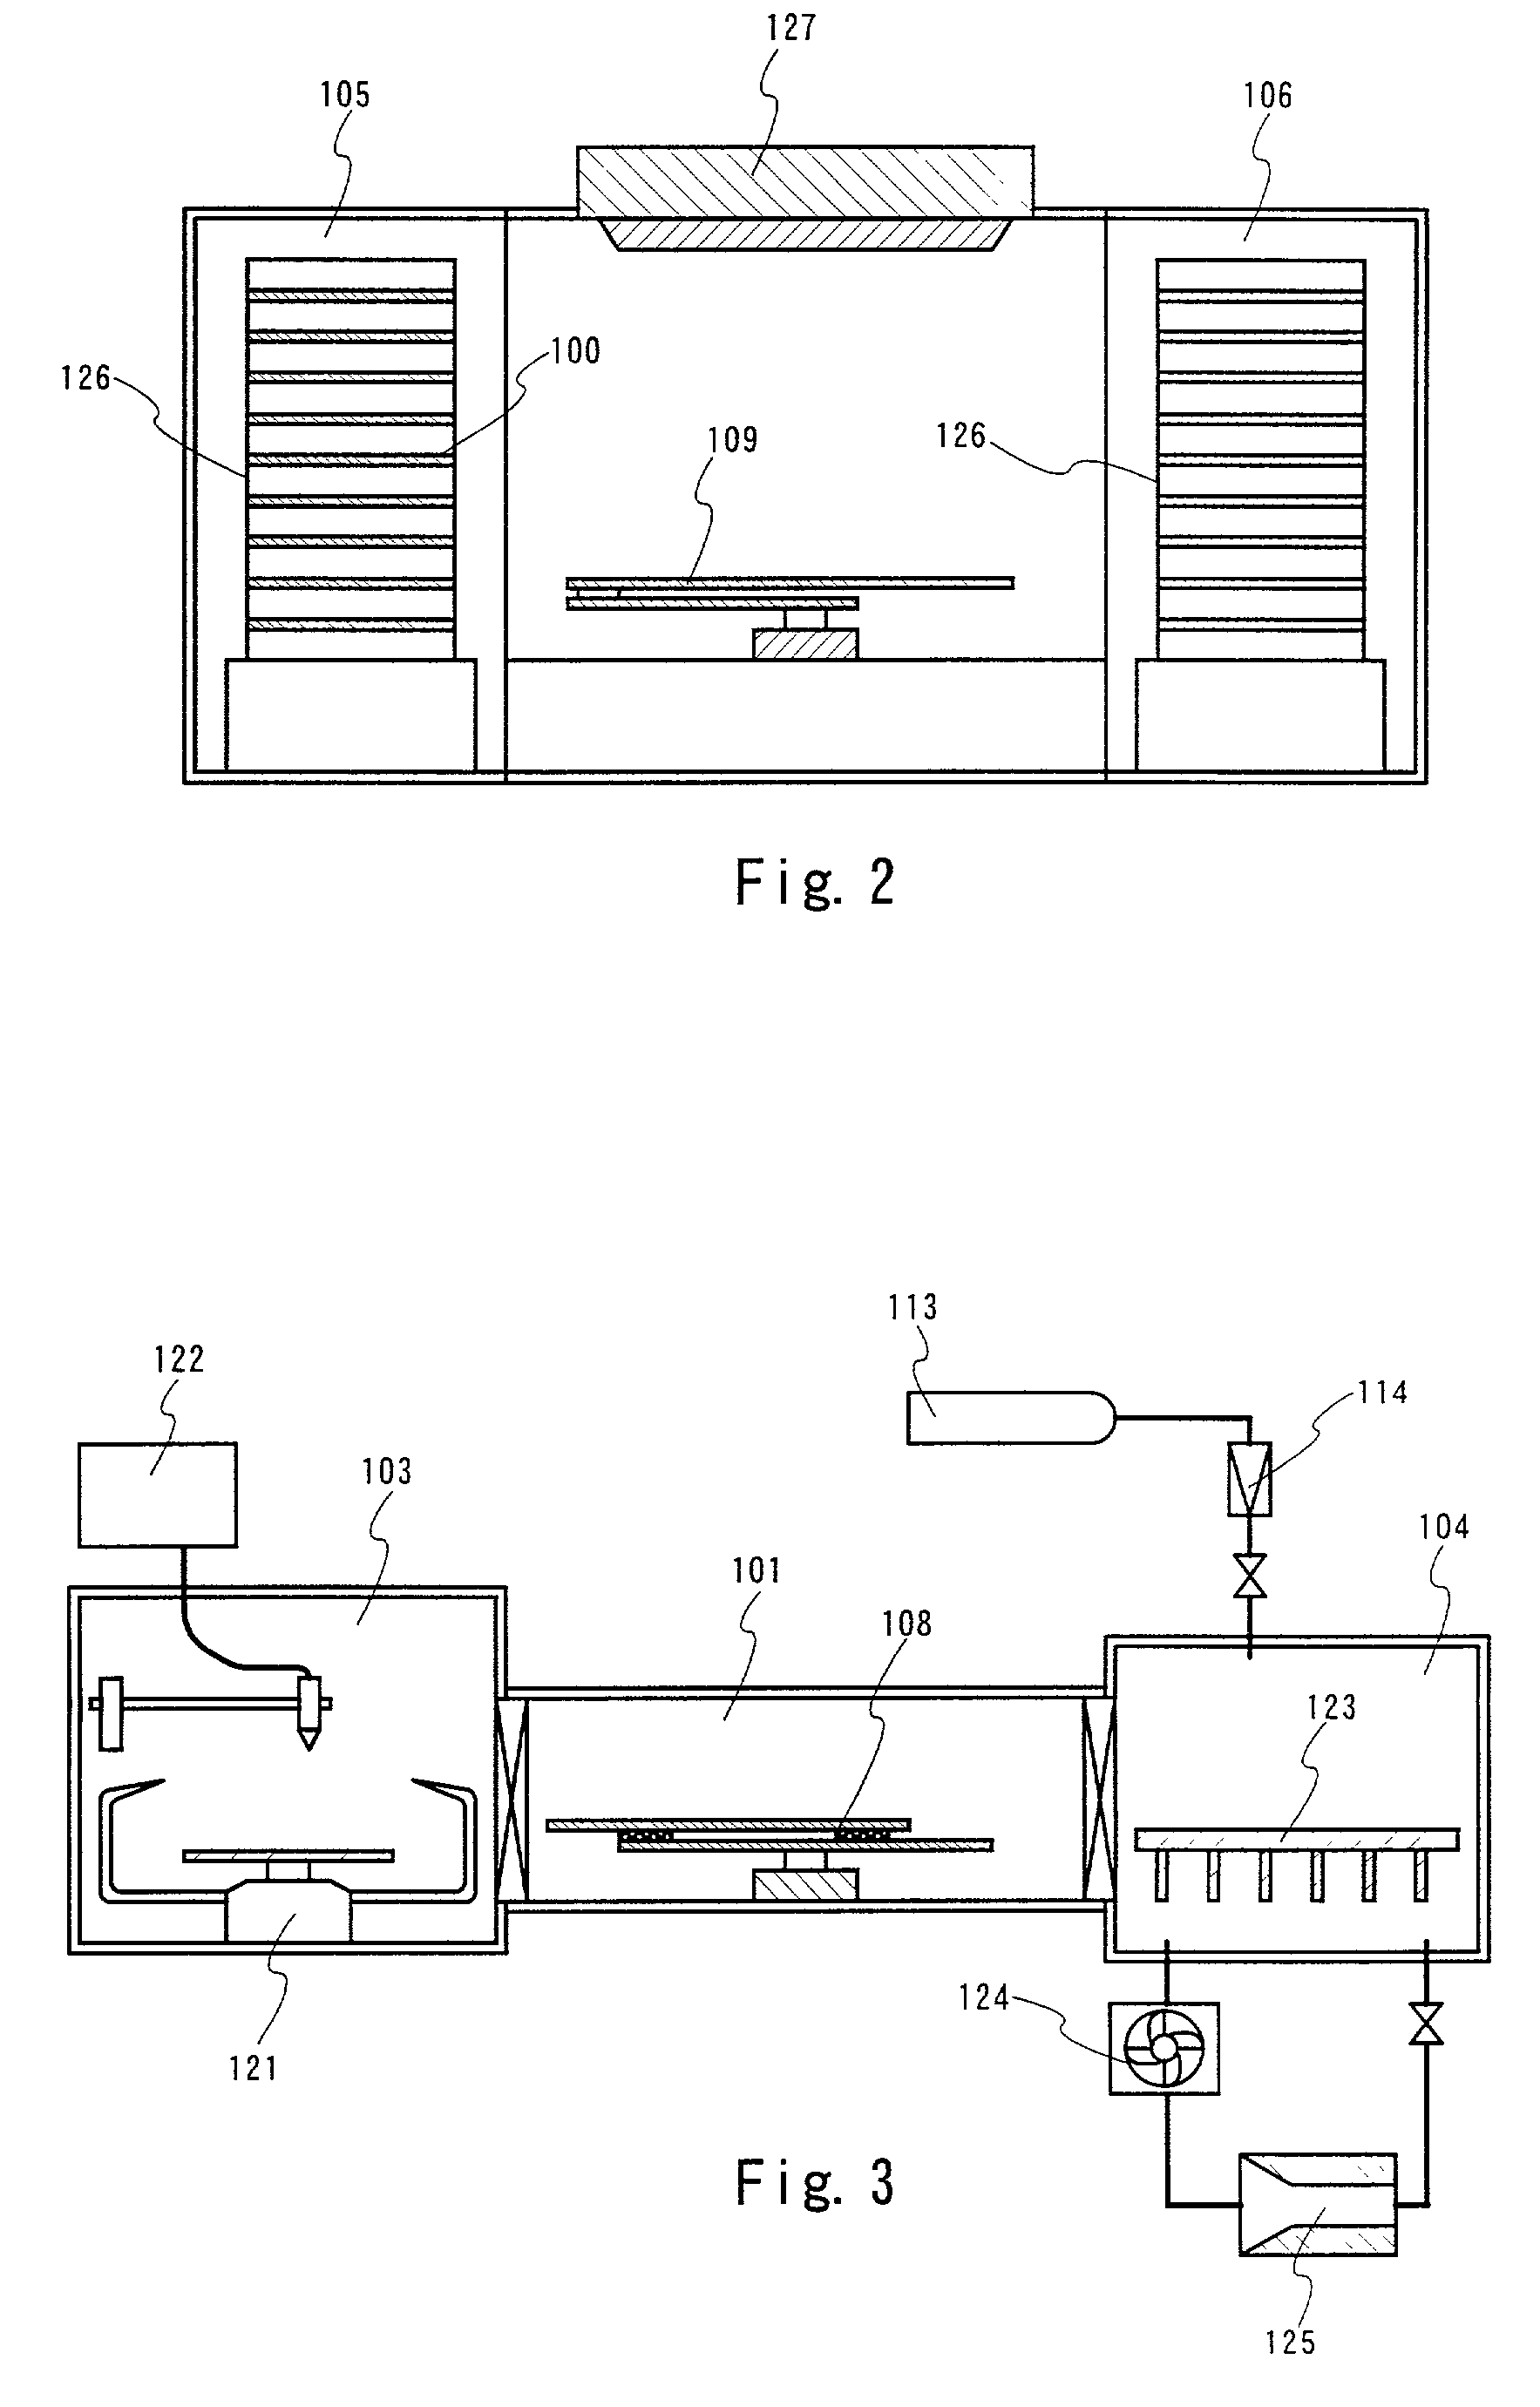 Heat treatment apparatus and method of manufacturing a semiconductor device